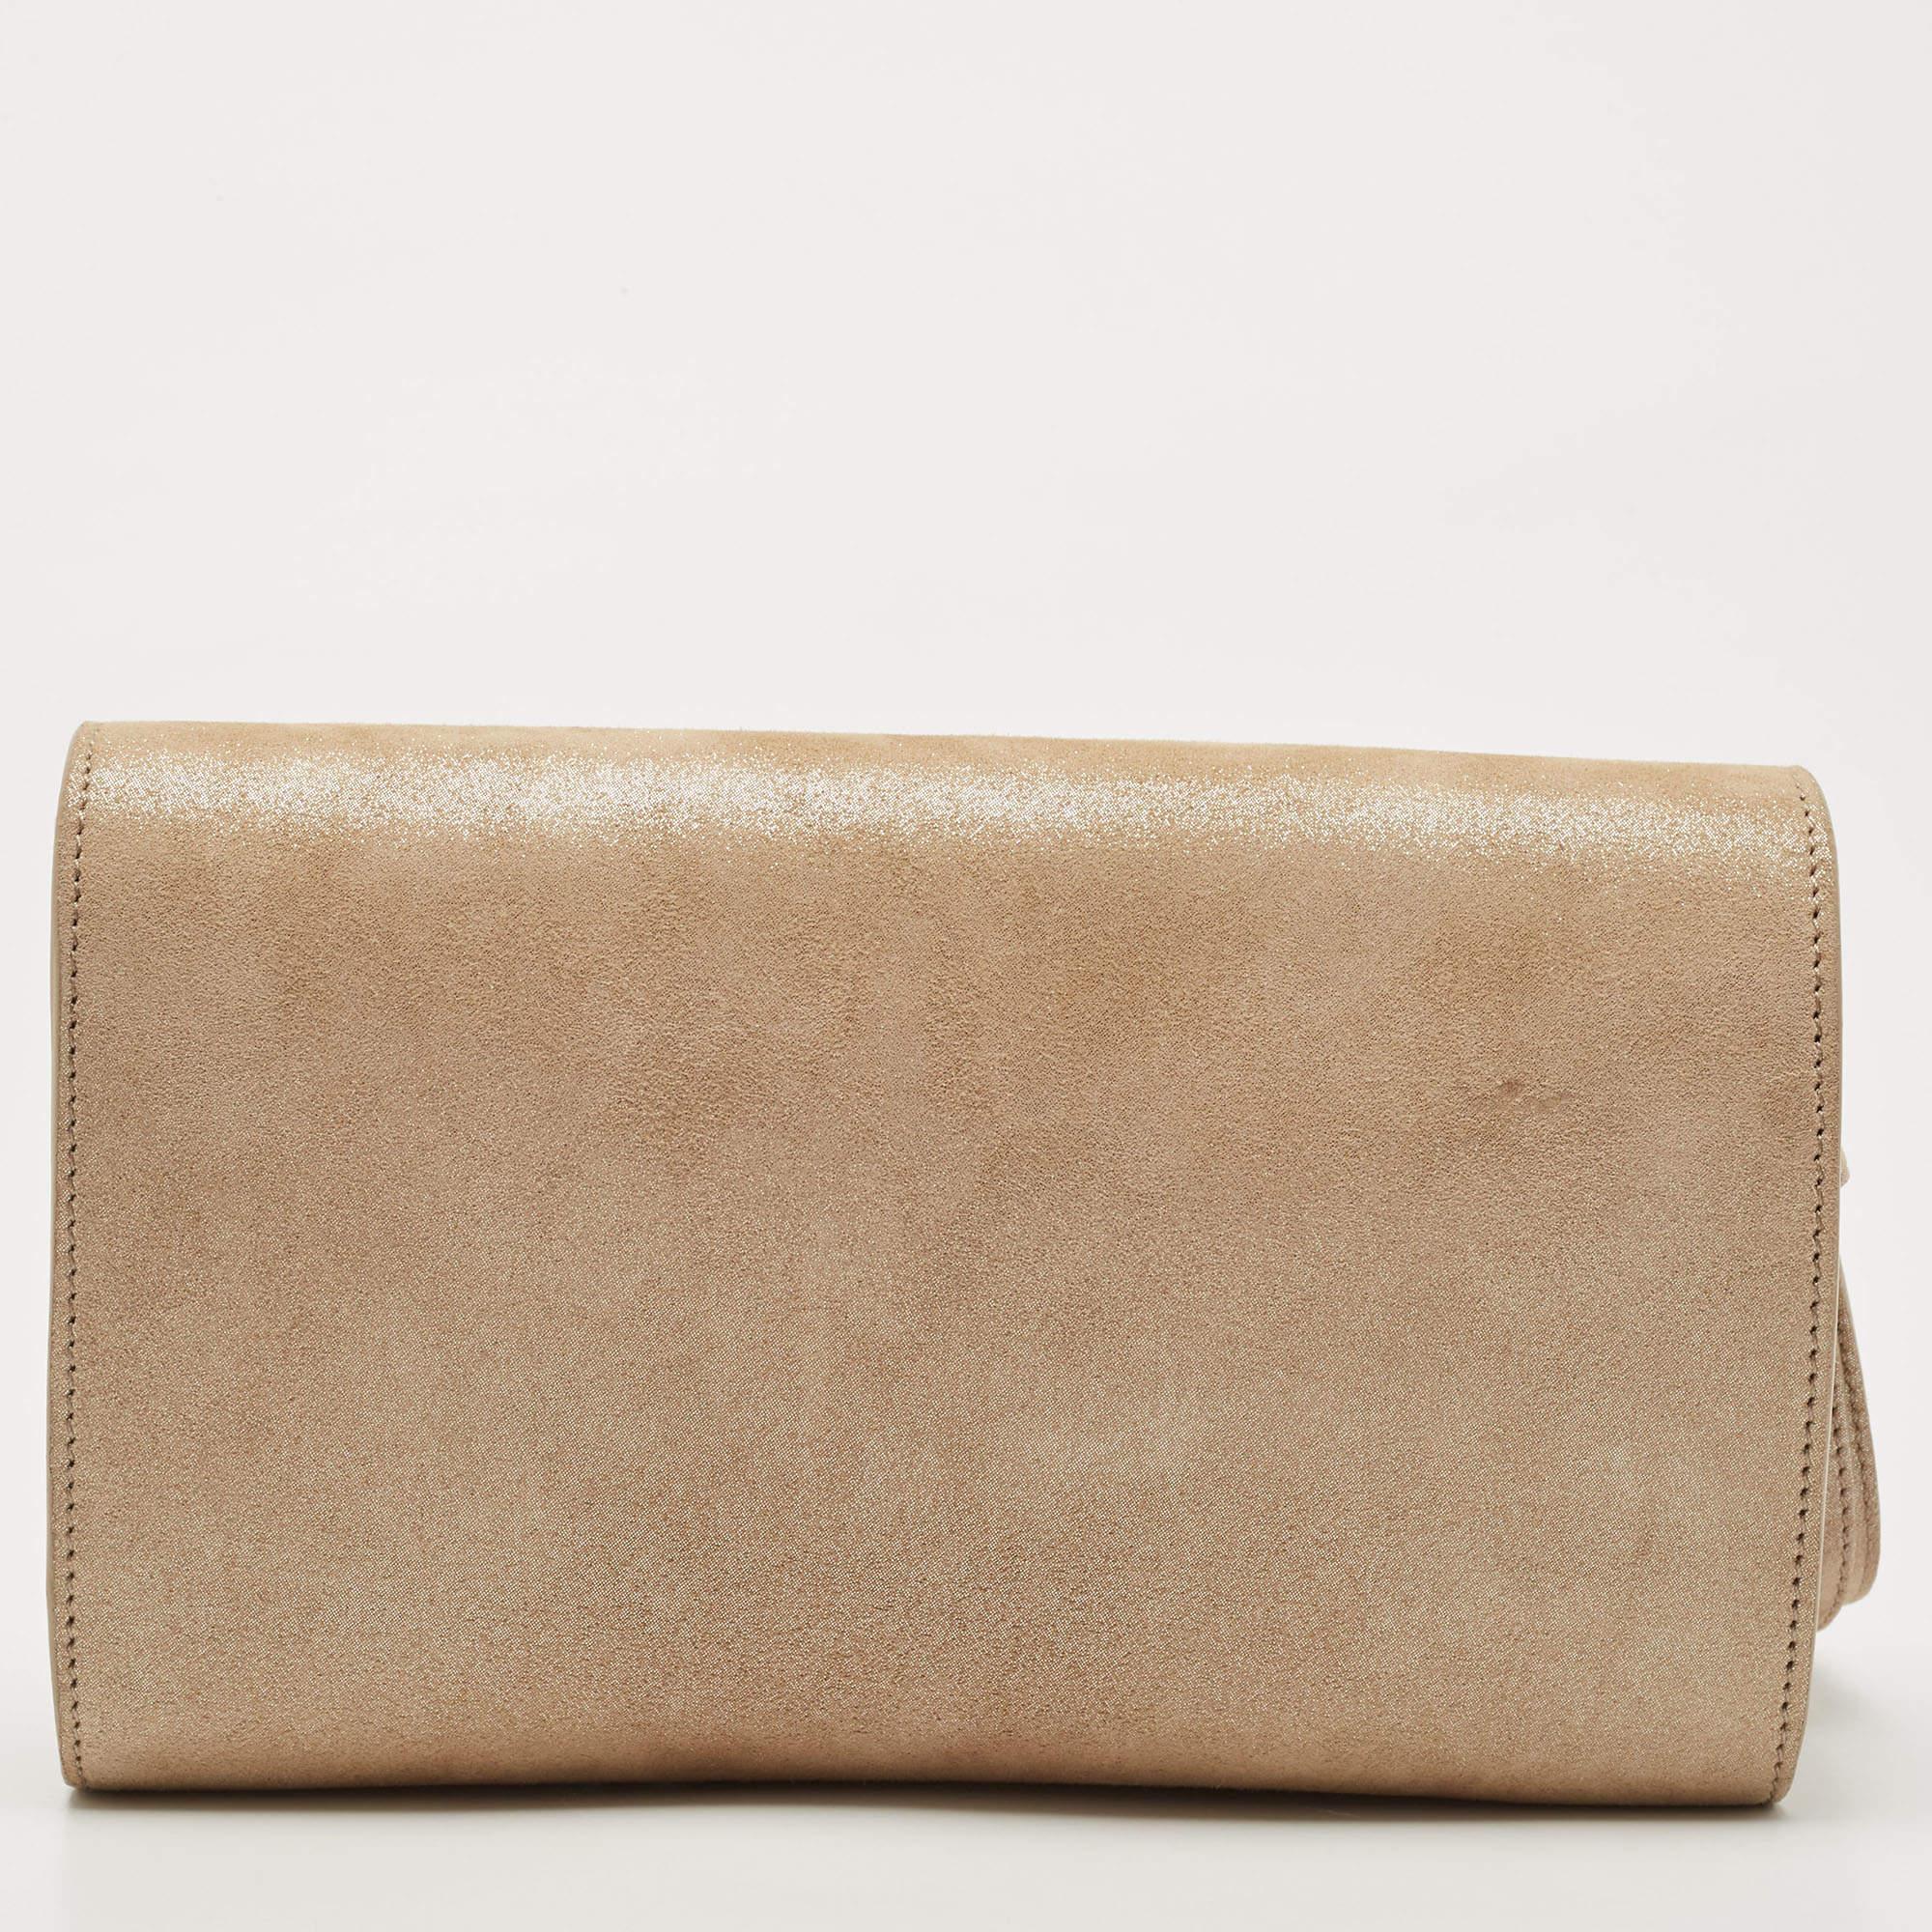 This clutch is just the right accessory to compliment your chic ensemble. It comes crafted in quality material featuring a well-sized interior that can comfortably hold all your little essentials.

Includes: Info Booklet, Authenticity Card, Brand